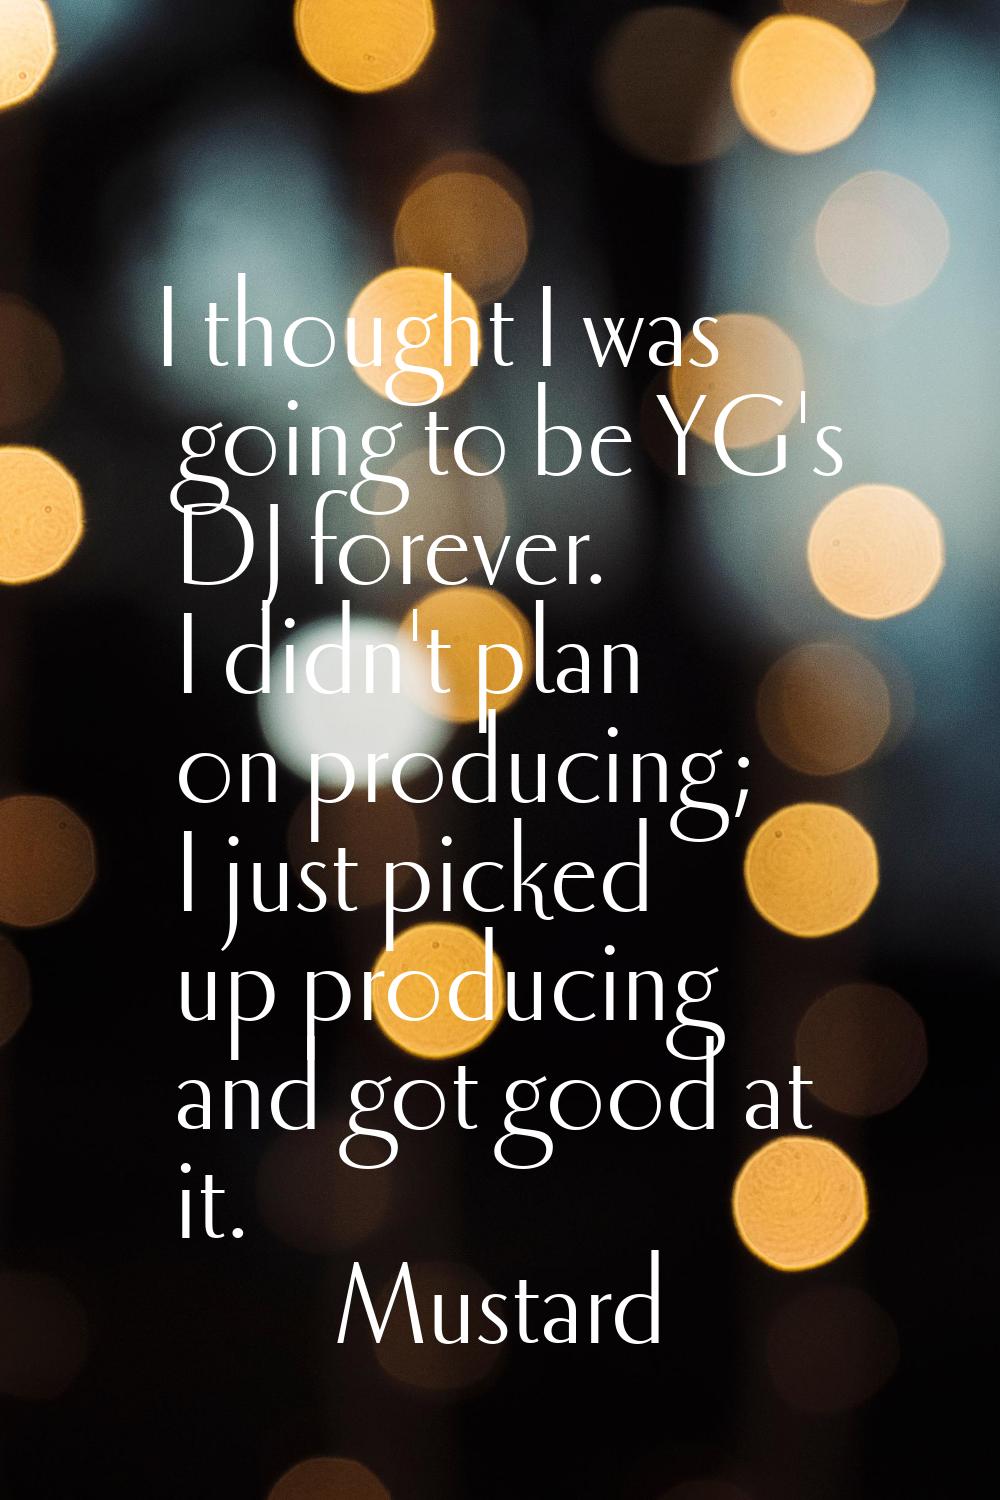 I thought I was going to be YG's DJ forever. I didn't plan on producing; I just picked up producing